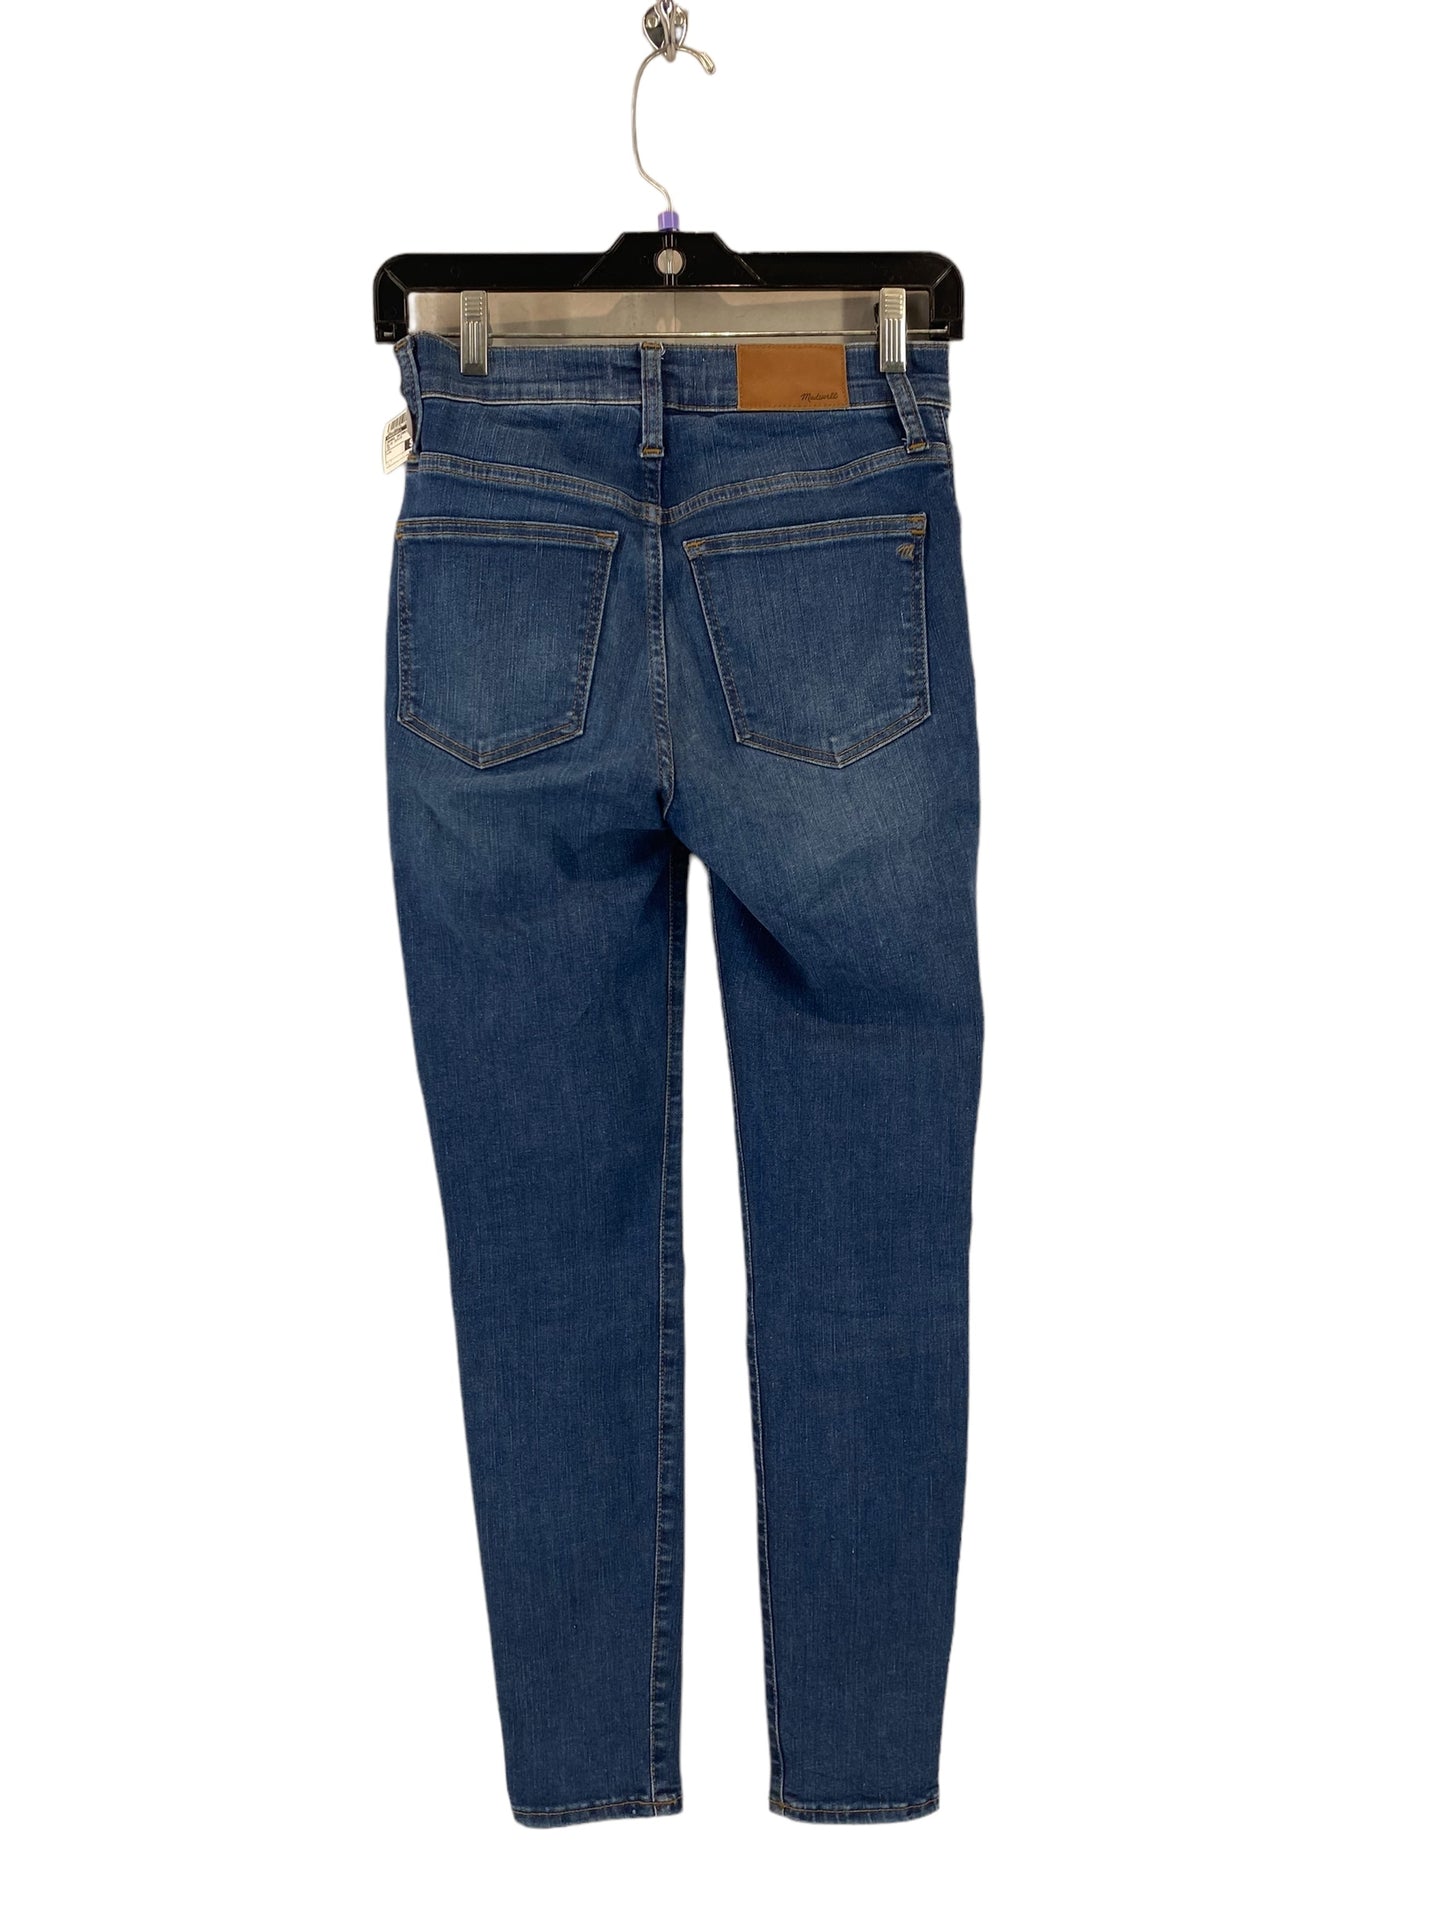 Jeans Skinny By Madewell